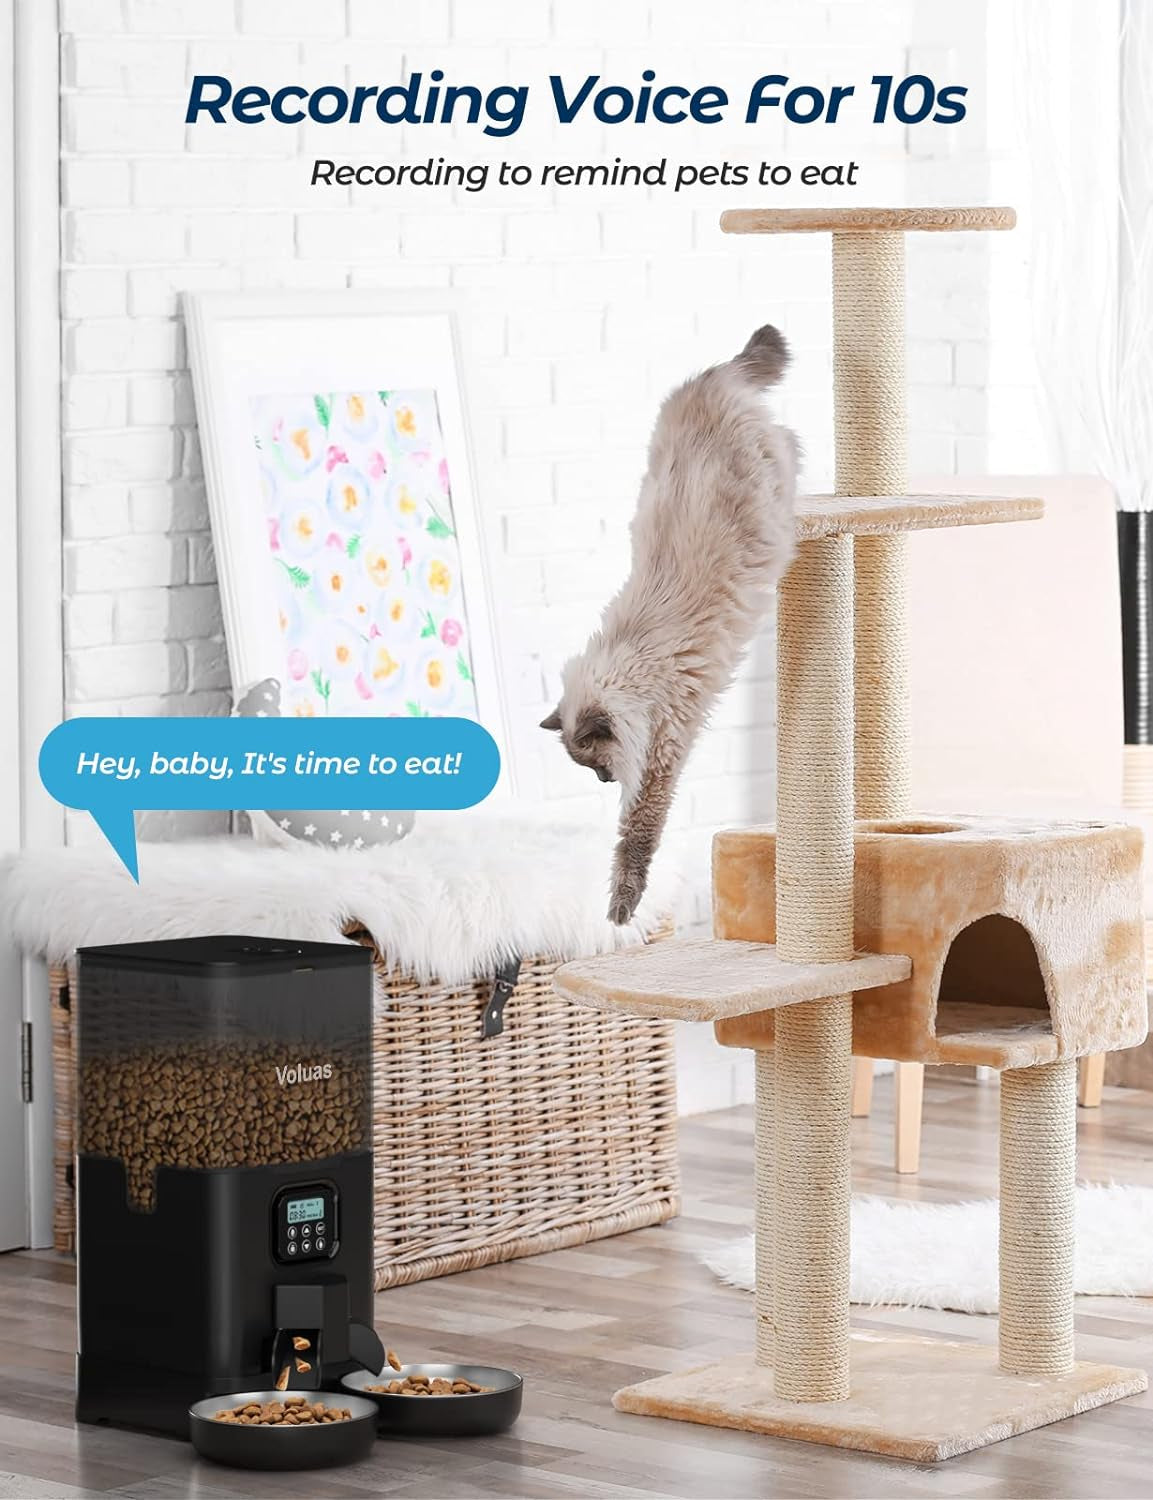 Automatic Dual Cat Feeder with 2 Stainless Steel Bowls, 6L Capacity, Timed Feeding & Memory Function